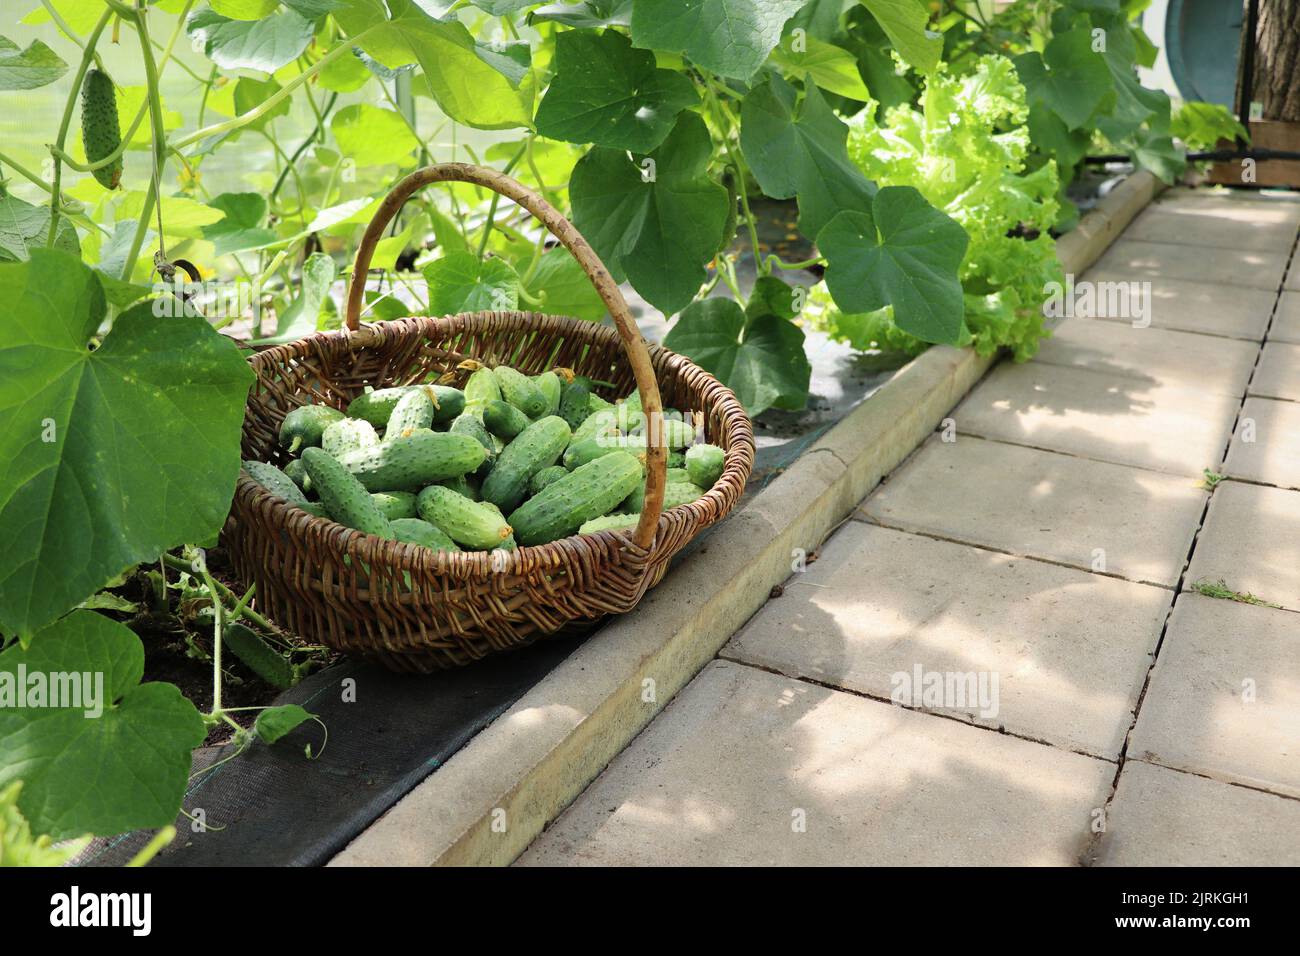 Freshly picked harvest of young cucumbers in a wicker basket. Growing natural and healthy vegetables. Country life. Healthy lifestyle Stock Photo